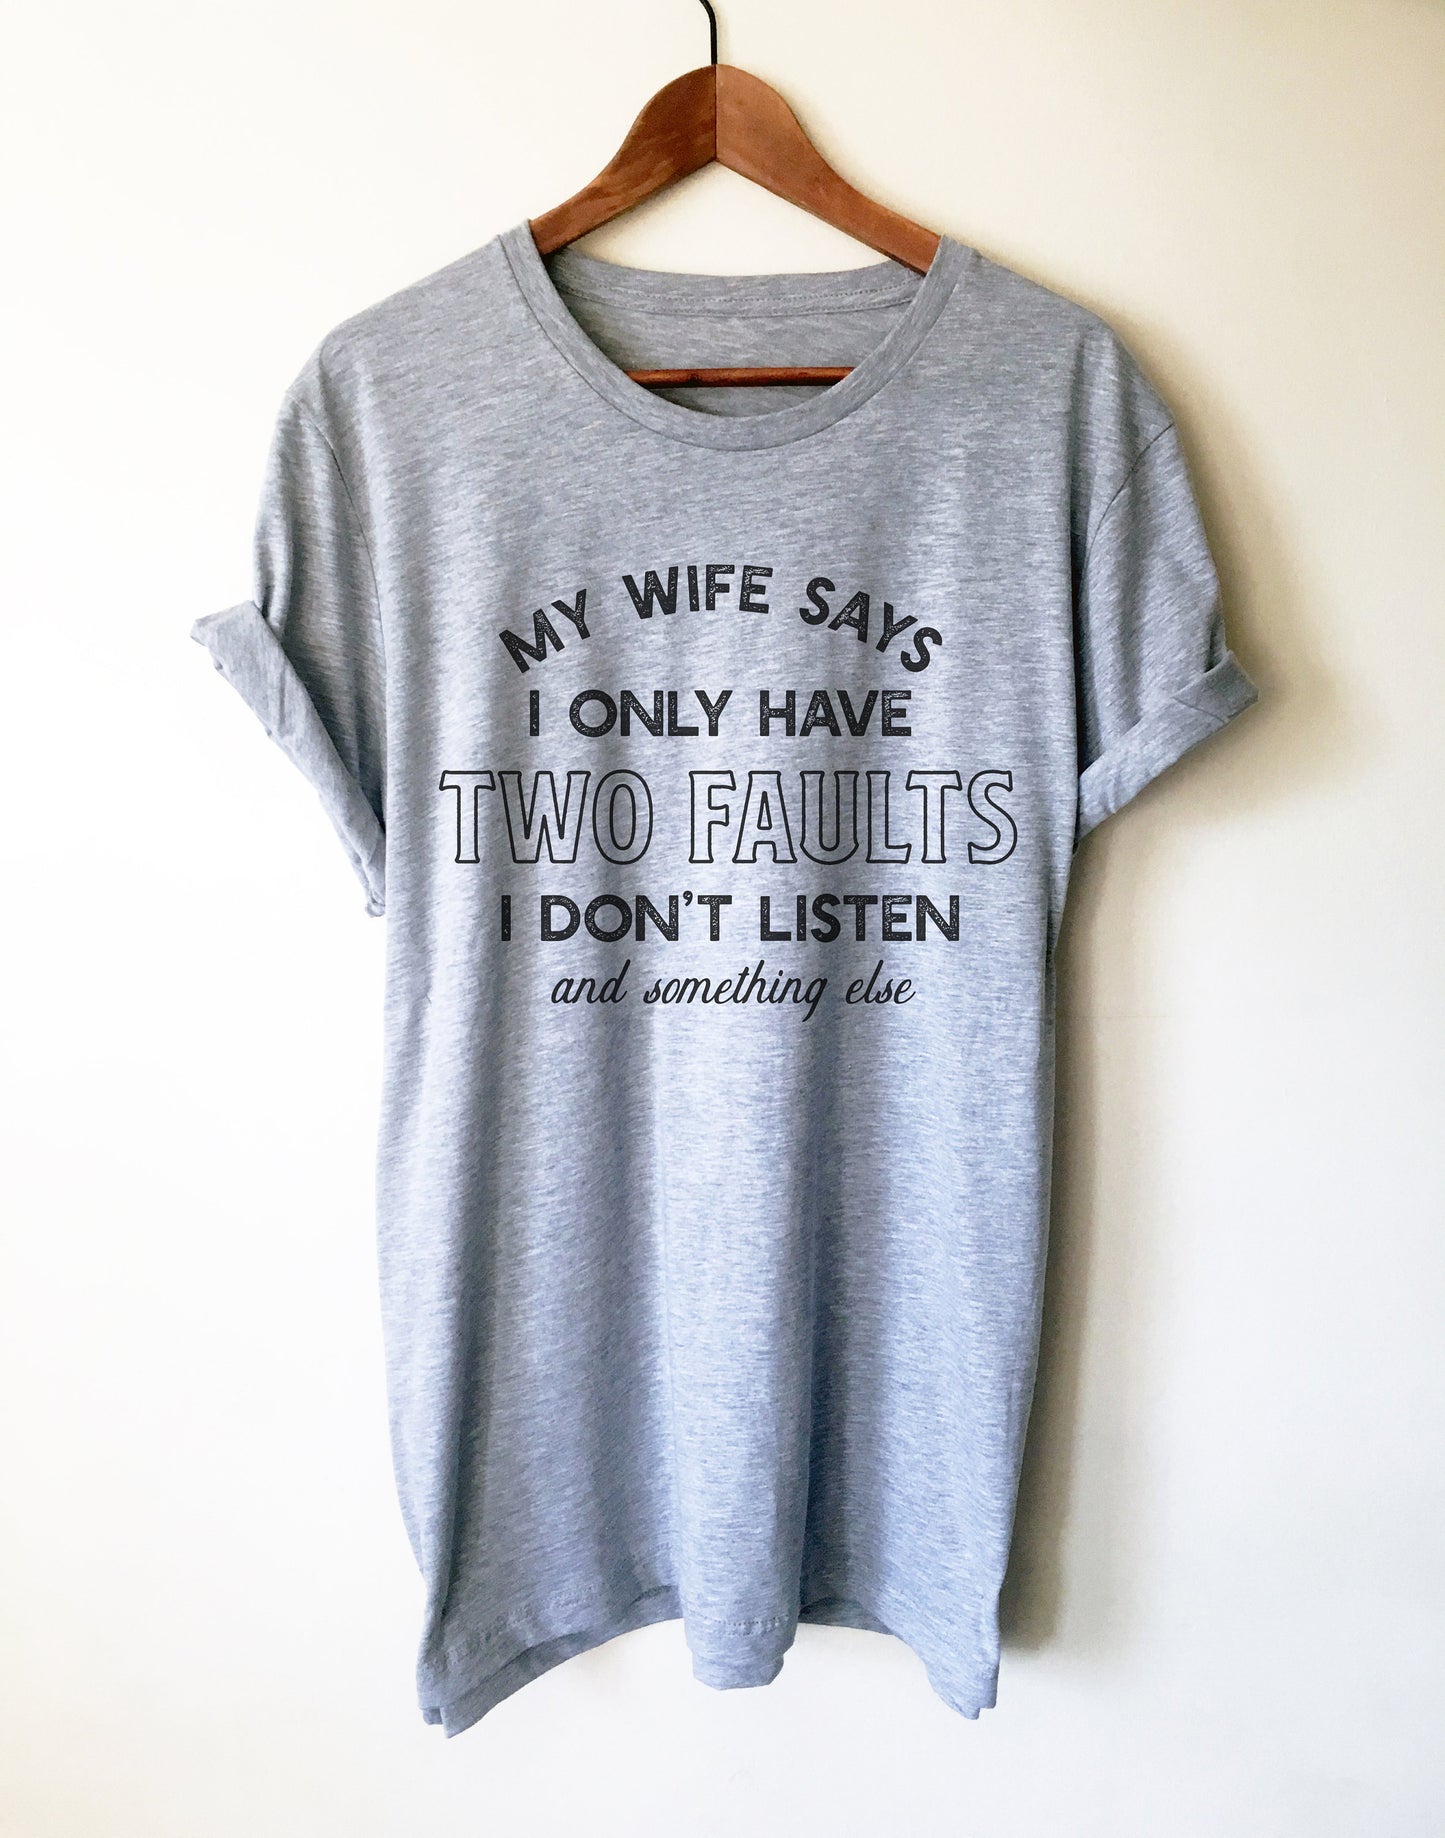 My Wife Says I Only Have Two Faults Unisex Shirt - Husband Shirt, Husband Gift, Fathers Day Shirt, Wife Shirt, Anniversary Shirt